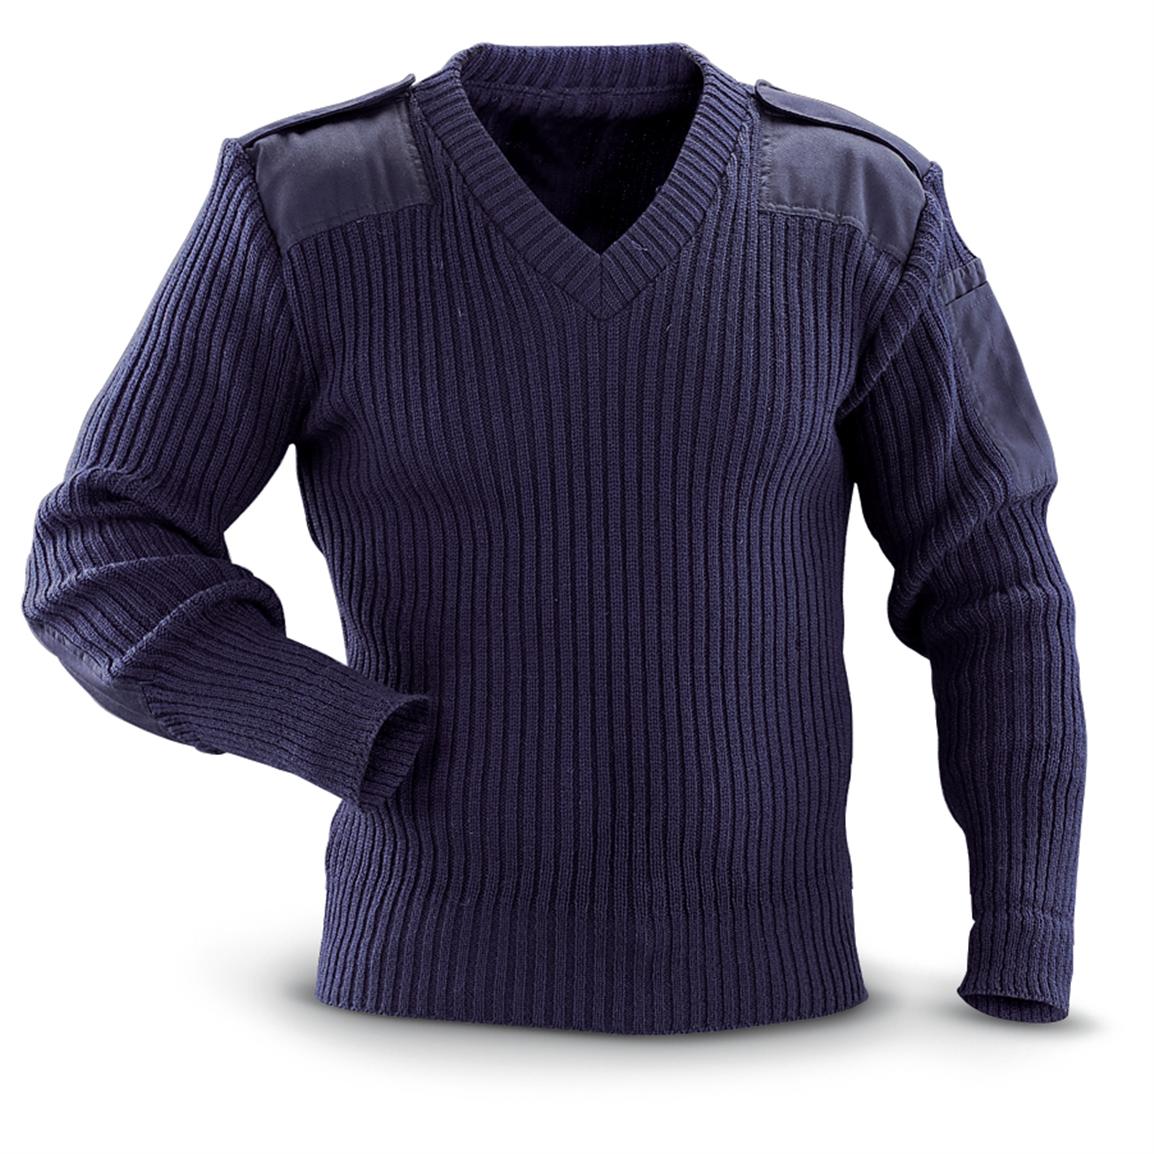 Army Sweater Navy Blue - Army Military